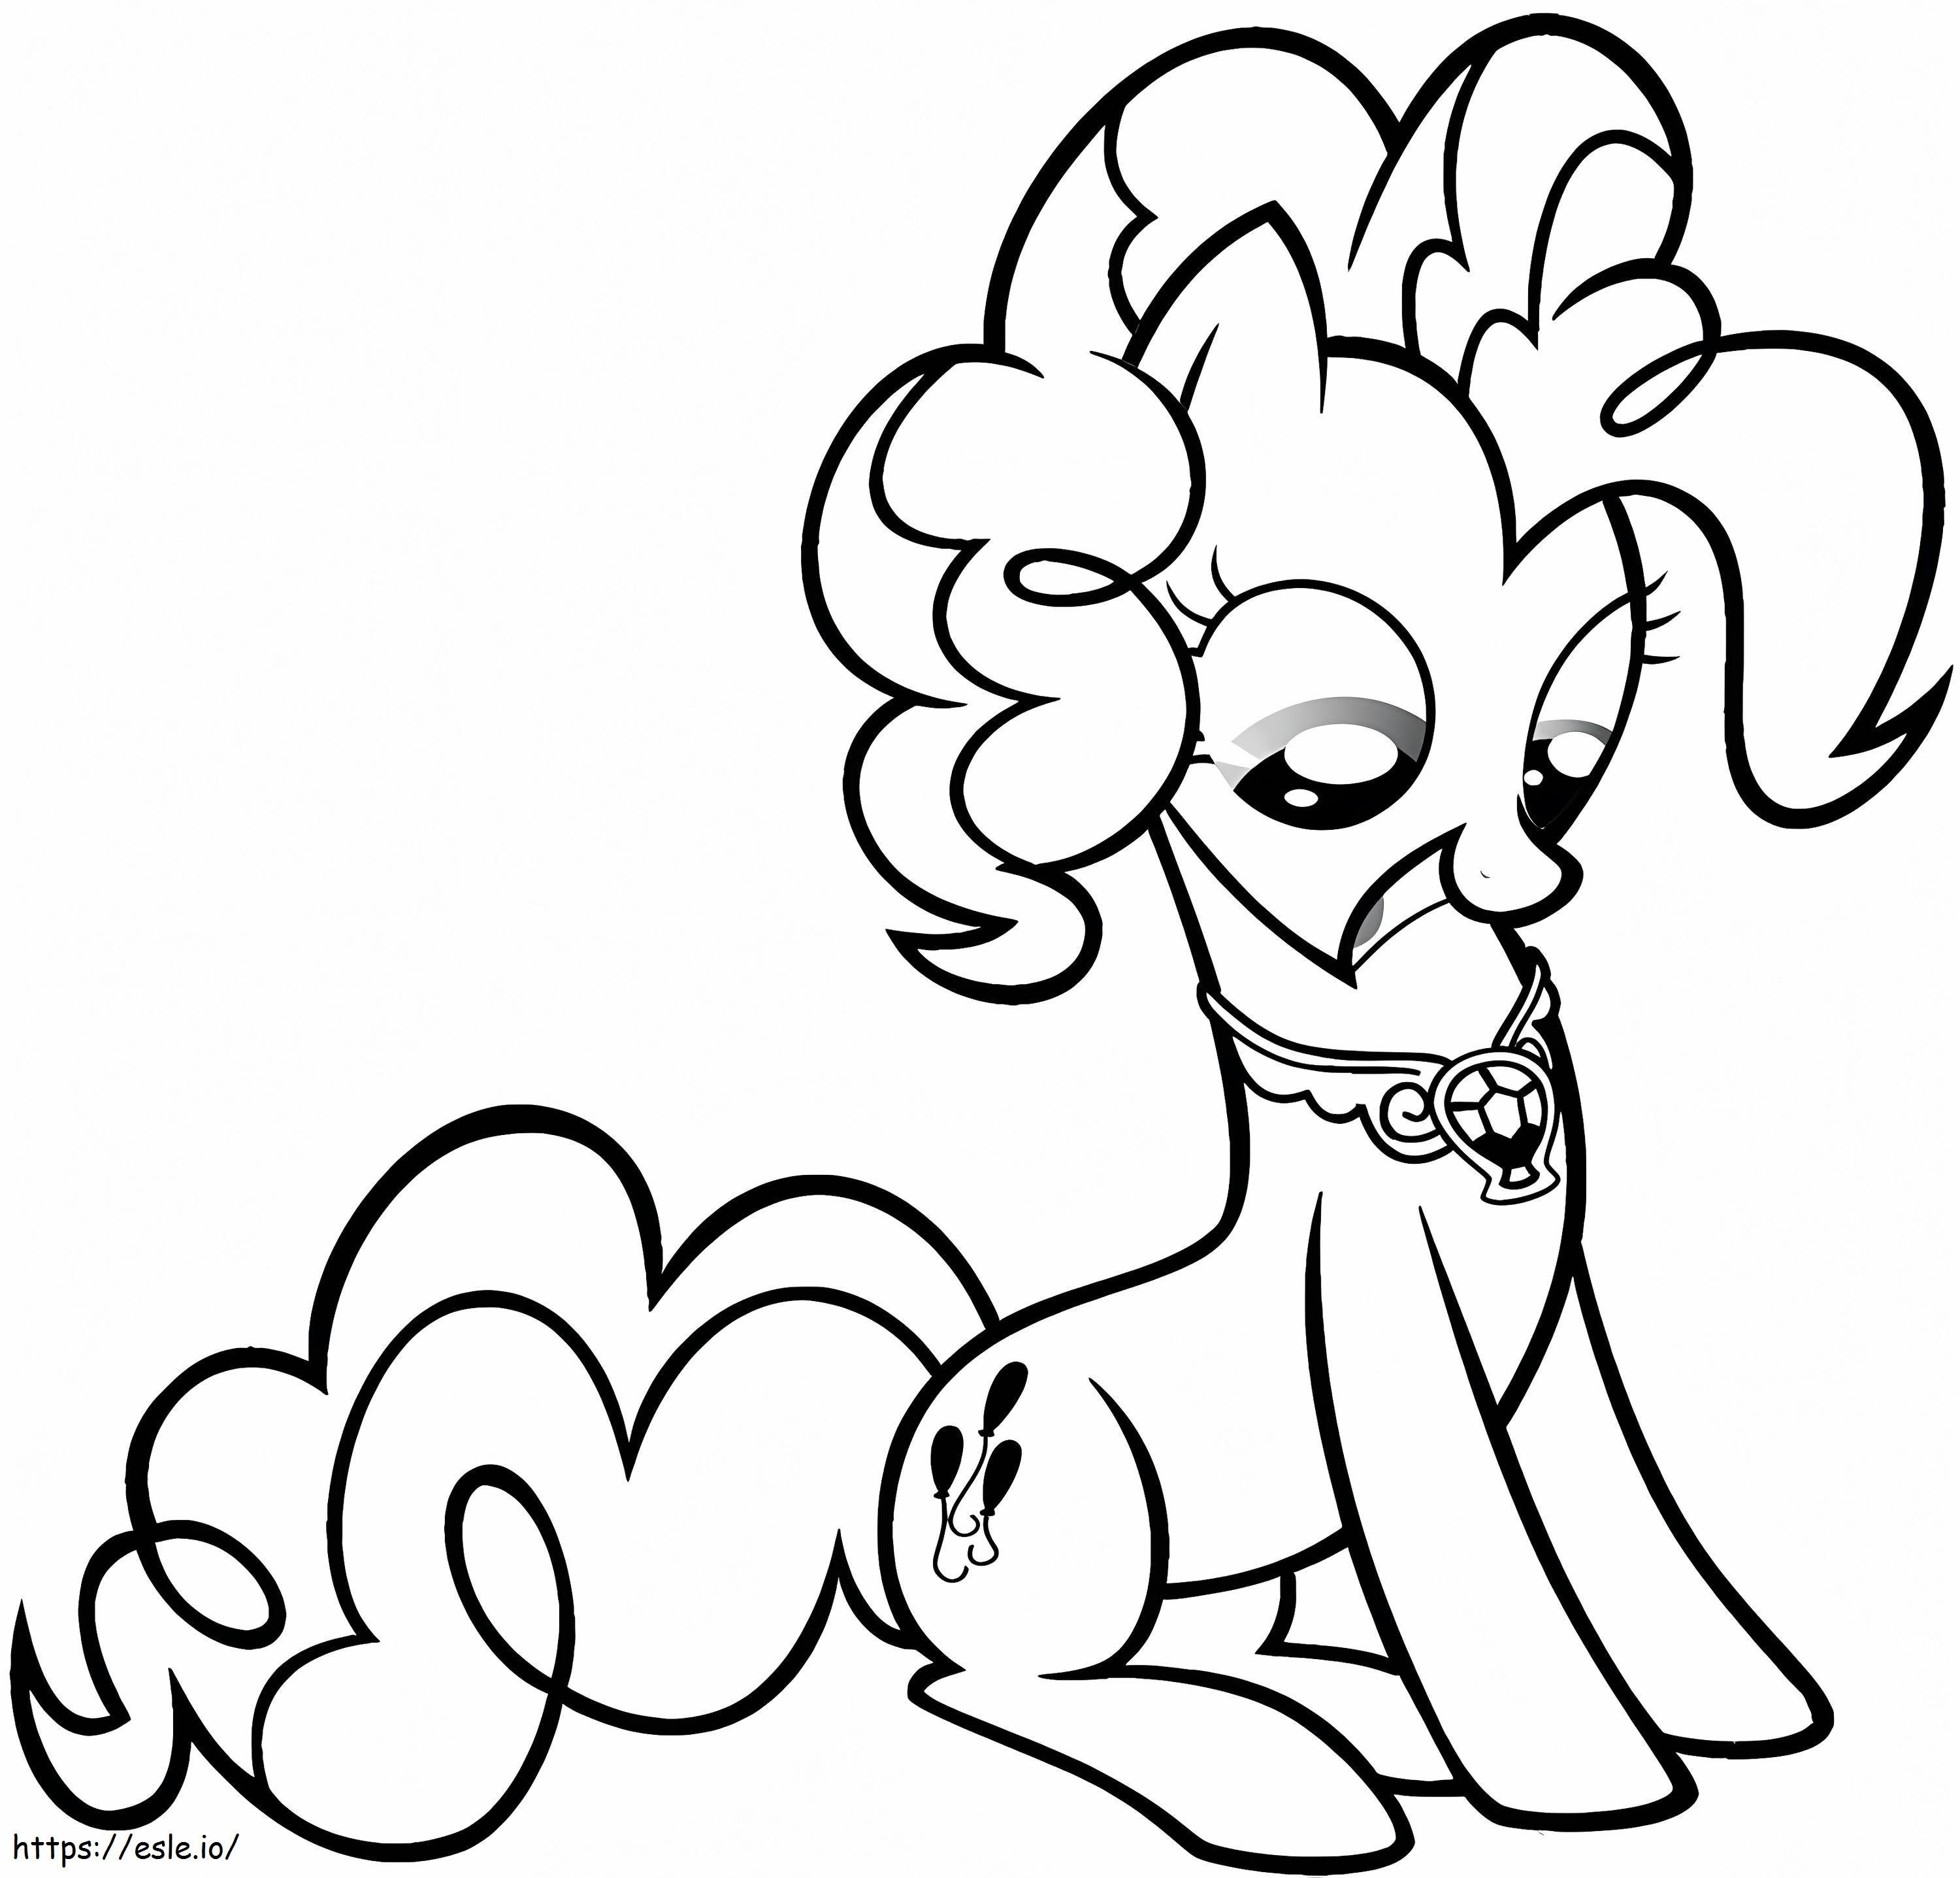 Amazing Pinkie Pie coloring page